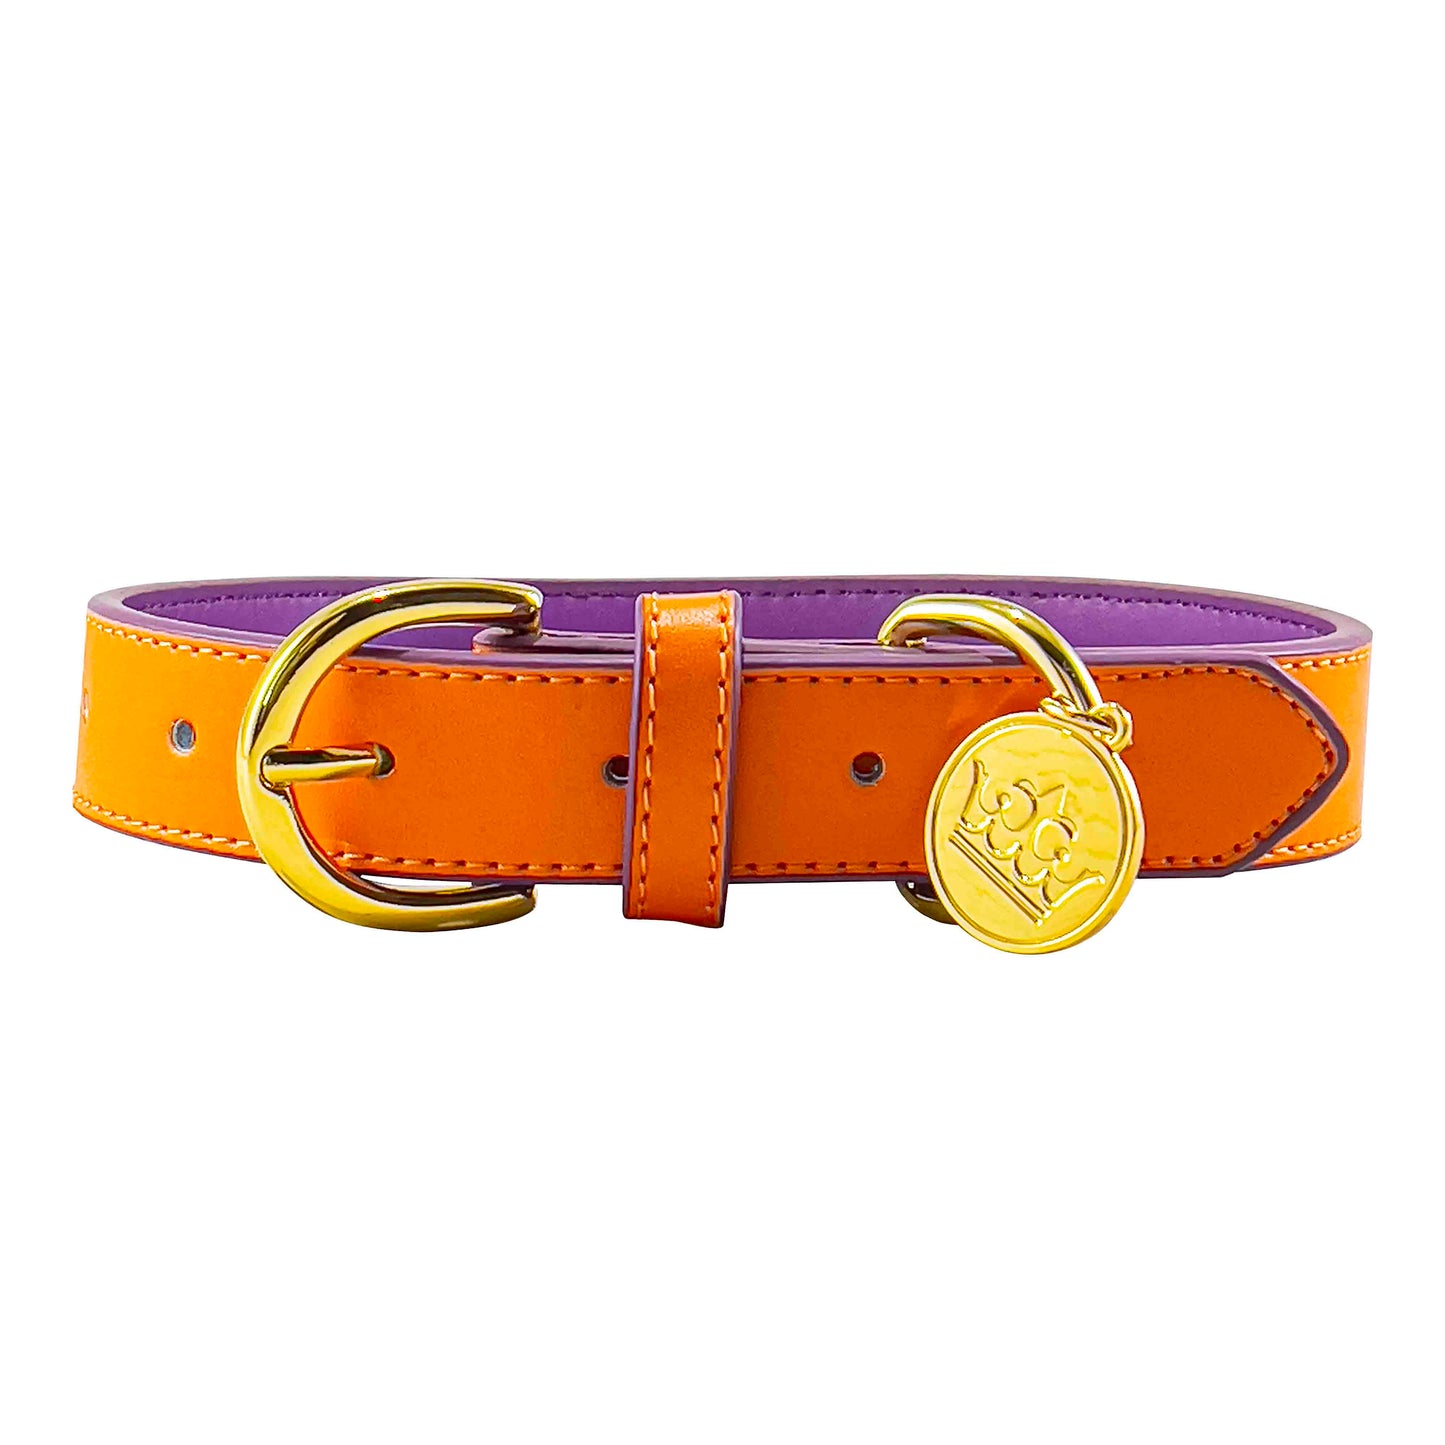 Bek & Co Regal Orange Leather French Bulldog collar on white background showing crown charm